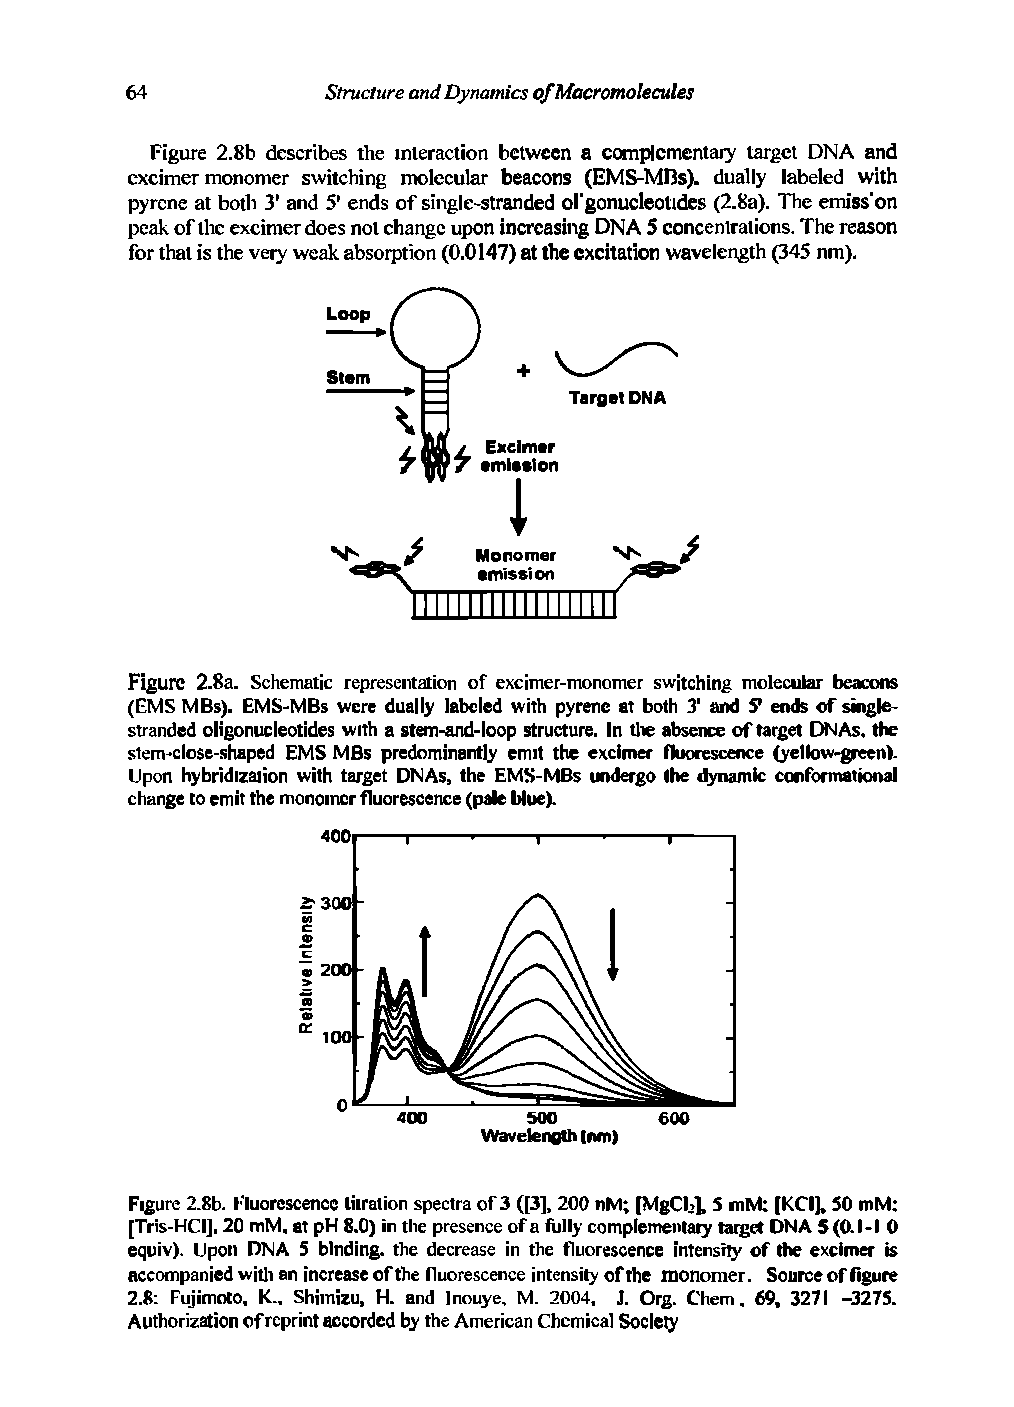 Figure 2.8a. Schematic representation of excimer-monomer switching molecular beacons (EMS MBs). EMS-MBs were dually labeled with pyrene at both 3 and S ends of single-stranded oligonucleotides with a stem-and-loop structure. In tlie absence of target DNAs. the slem-close-shaped EMS MBs predominantly emit the exclmer fluorescence (yellow-green). Upon hybridization with target DNAs, the EMS-MBs undergo the ilynamic conformational change to emit the monoincr fluorescence (pale Uue).